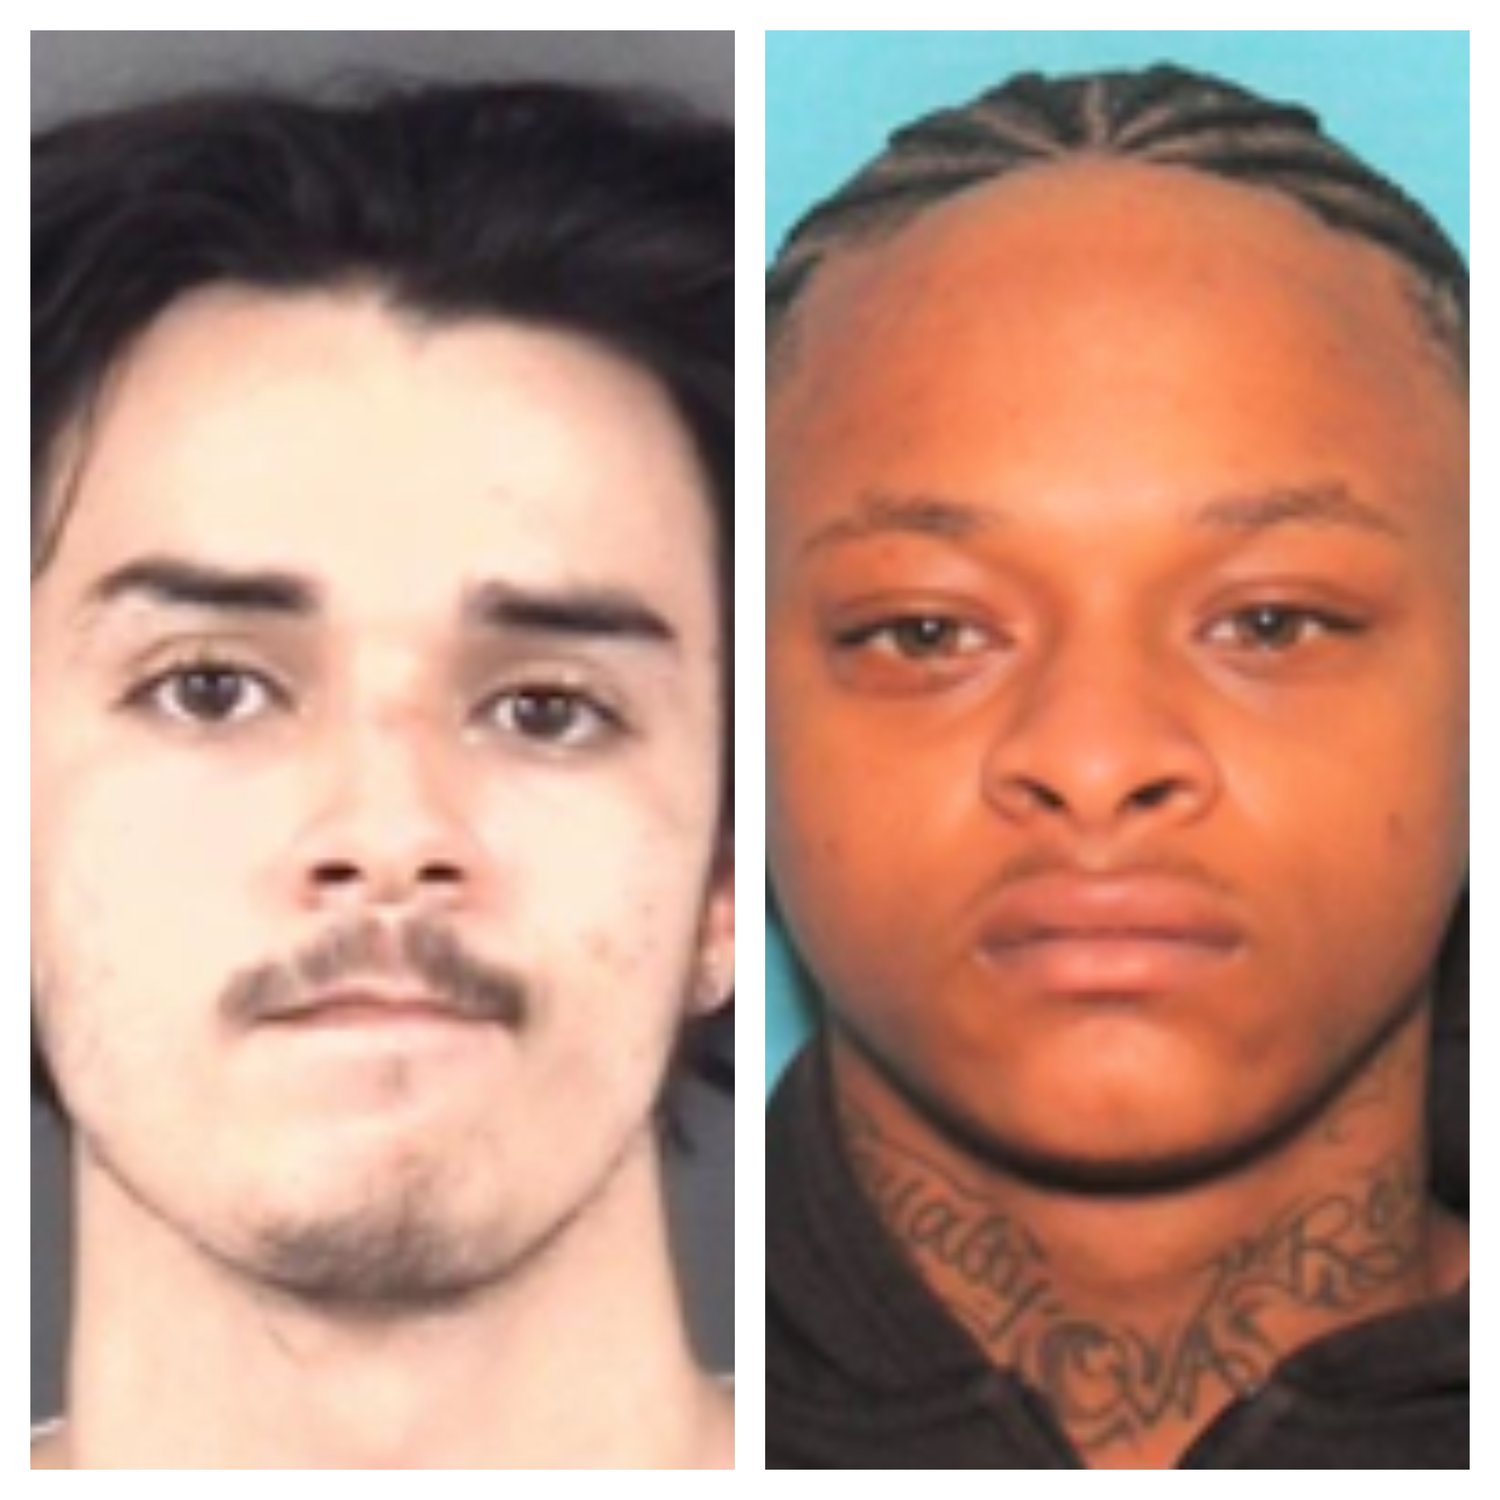 Timothy Renae Nava, 18, left, and Nizer Marquise Bennett, 19, are charged with first-degree murder, felony conspiracy, robbery with a dangerous weapon and shooting into an occupied dwelling. They are charged in the death of Nicholas Antonio Bobo, who was shot outside his apartment on Sept. 13 in the 900 block of Enclave Drive.